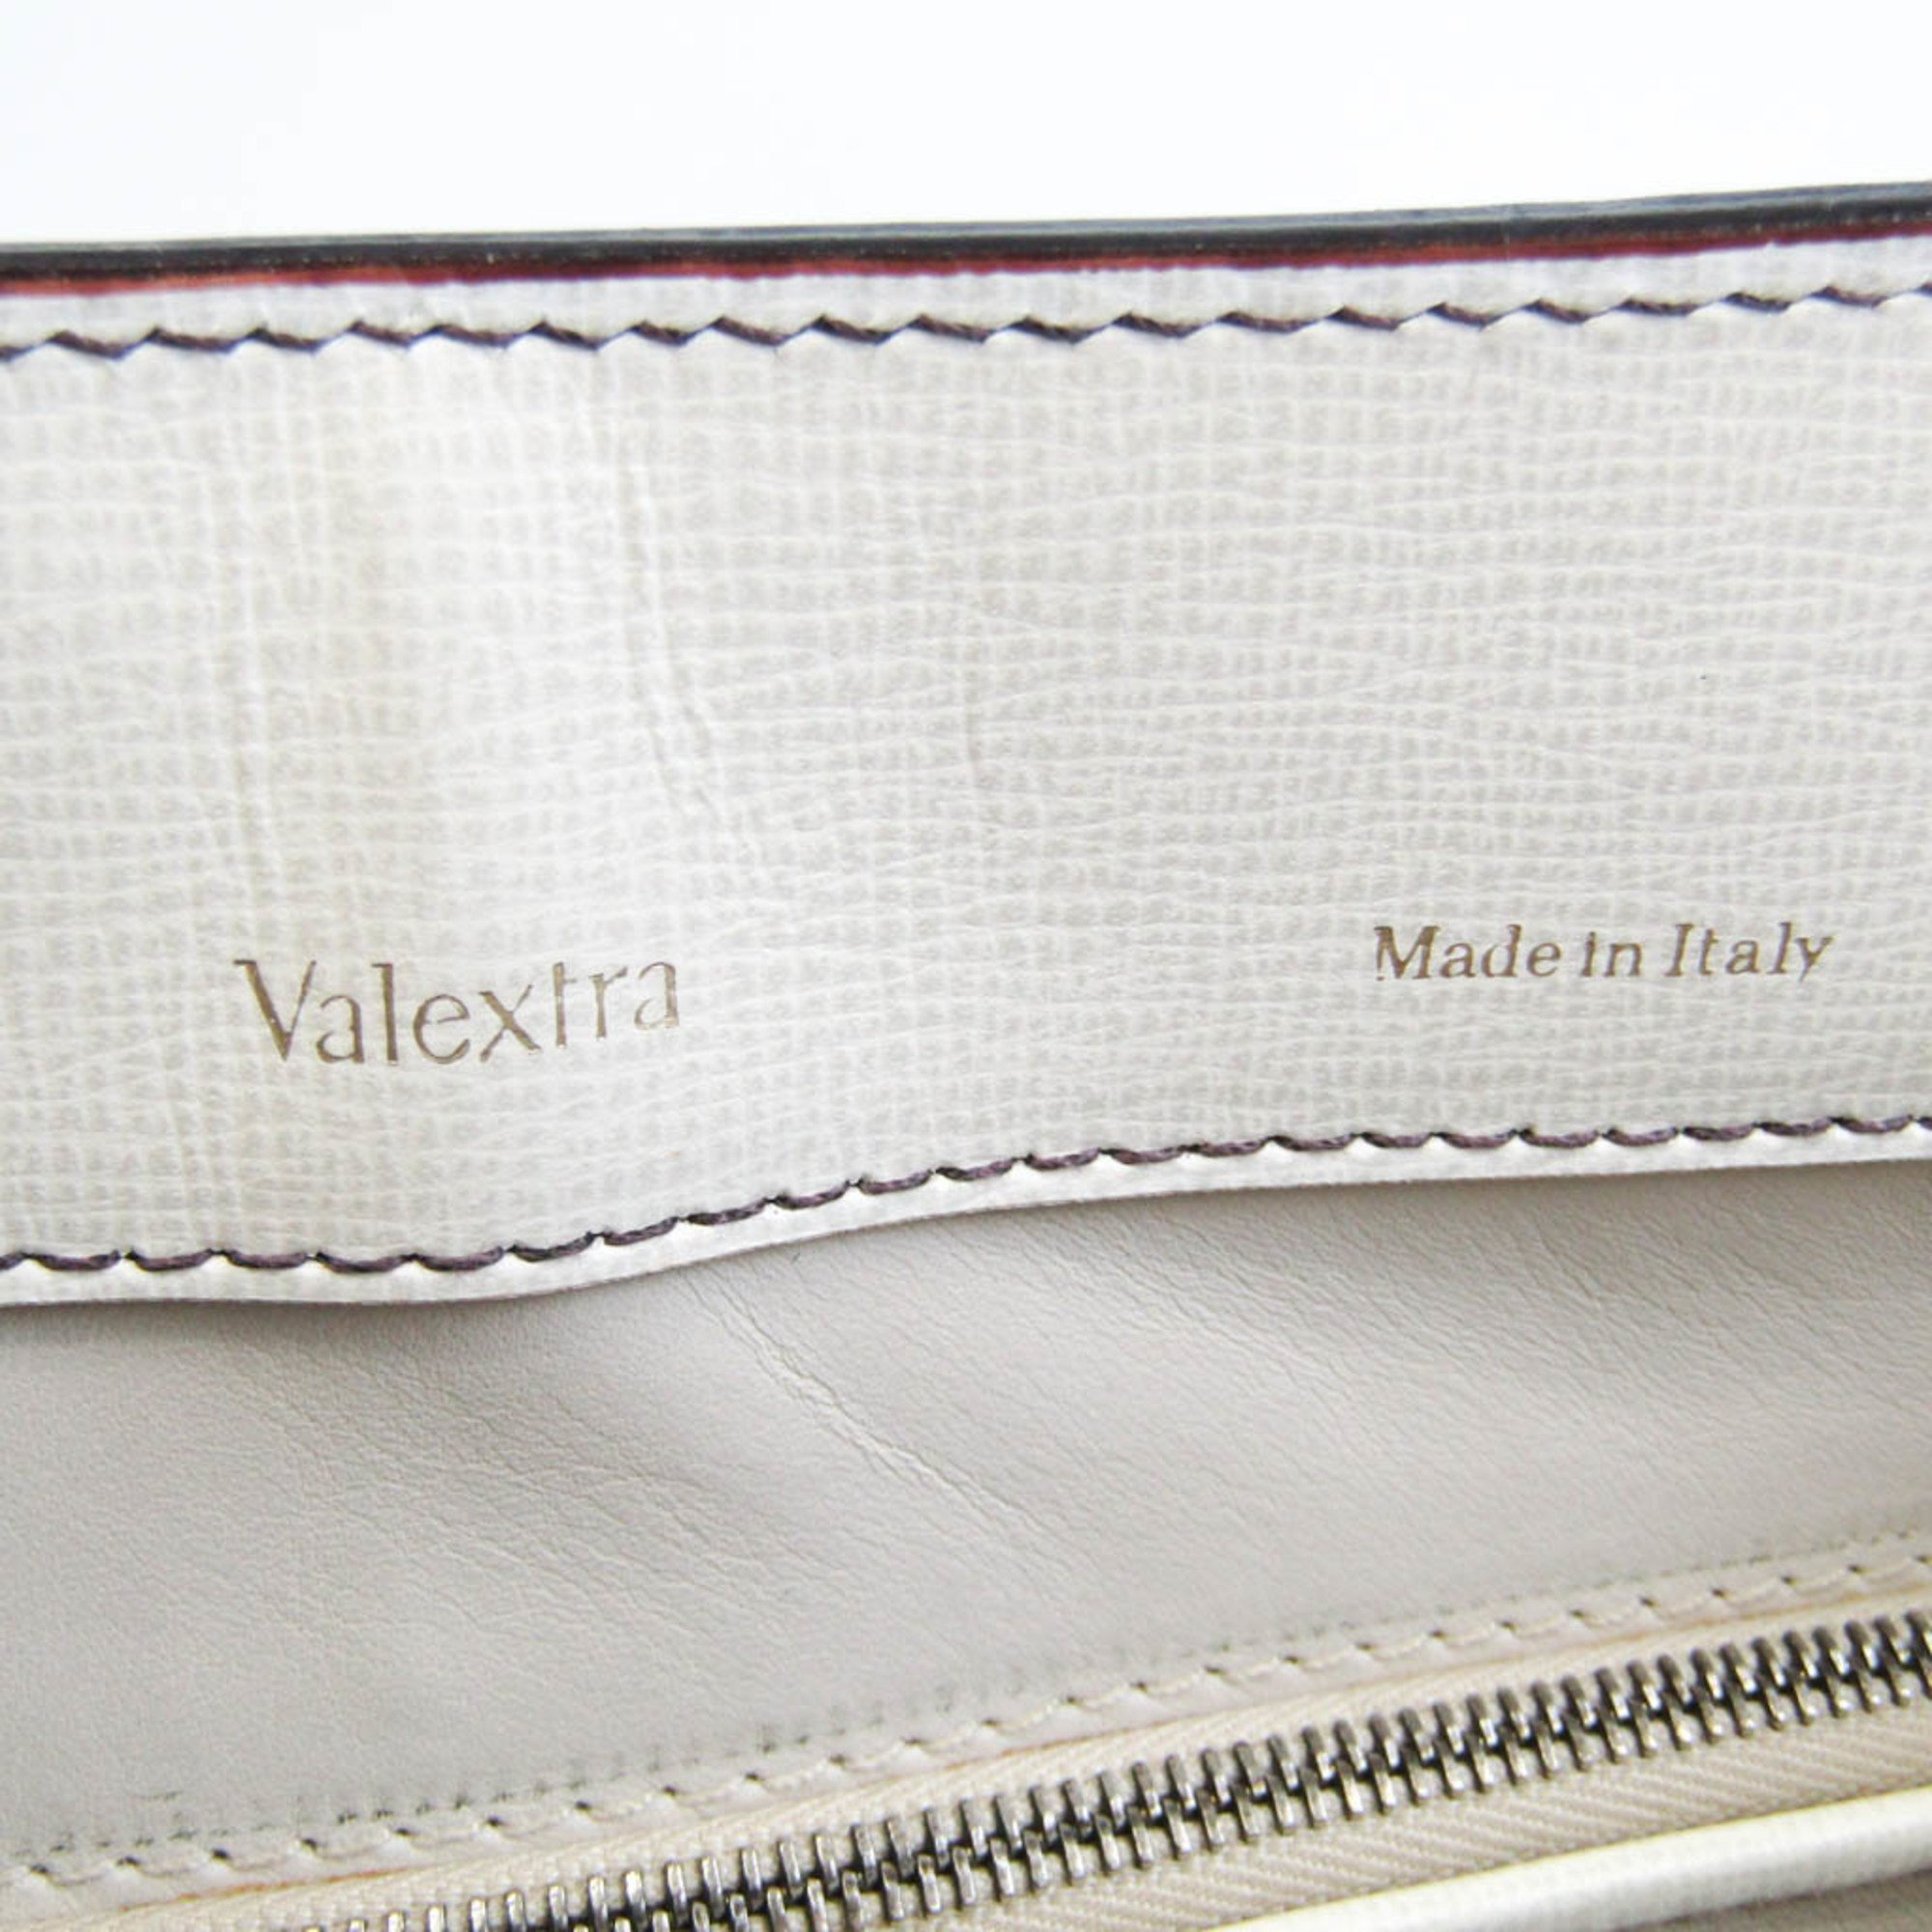 Valextra Women's Leather Tote Bag Off-white